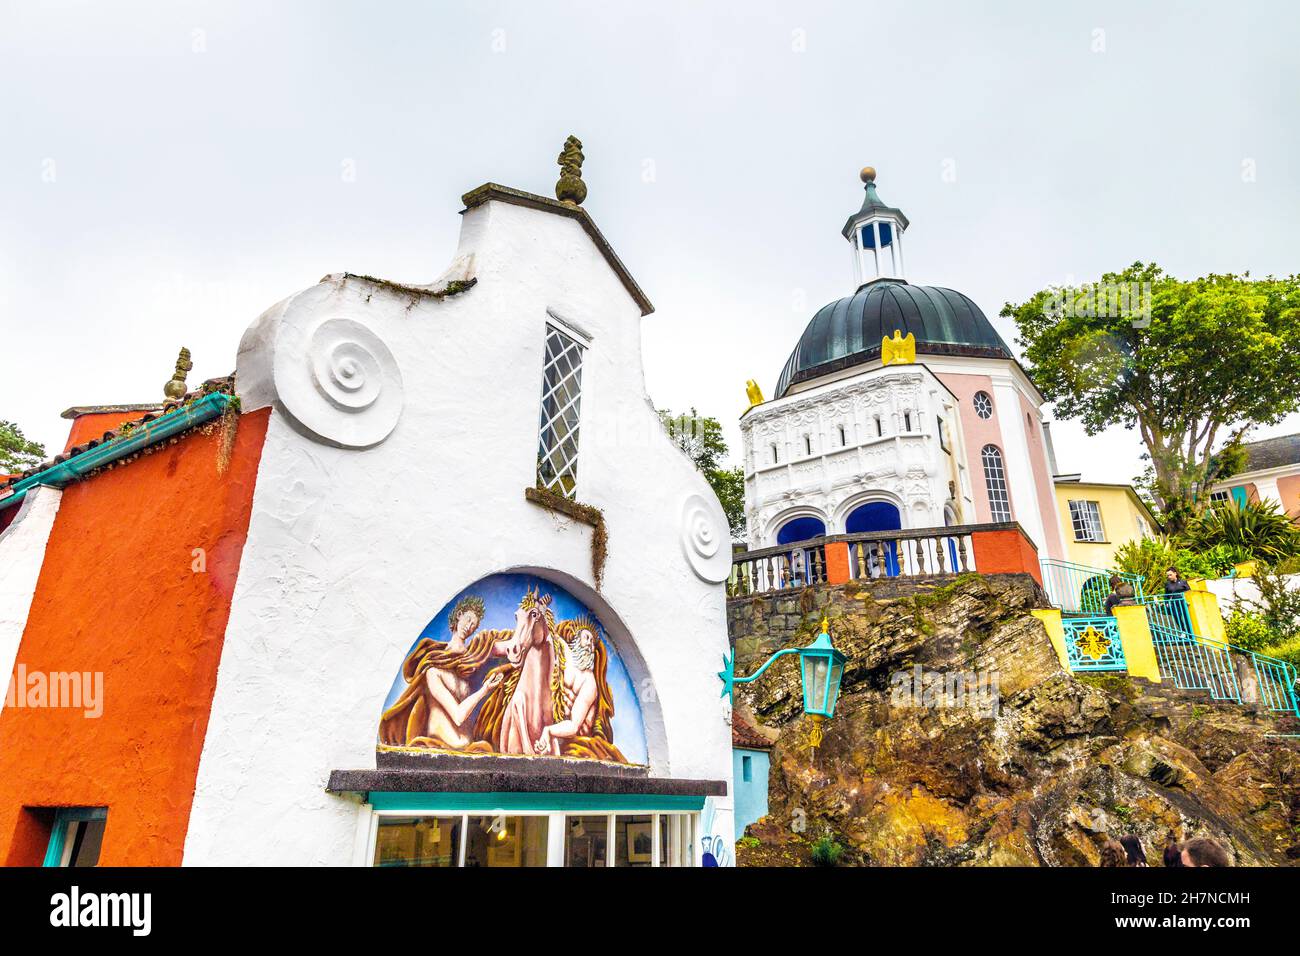 Colourful buildings at Mediterranean style town Portmeirion, Snowdonia National Park, Wales, UK Stock Photo